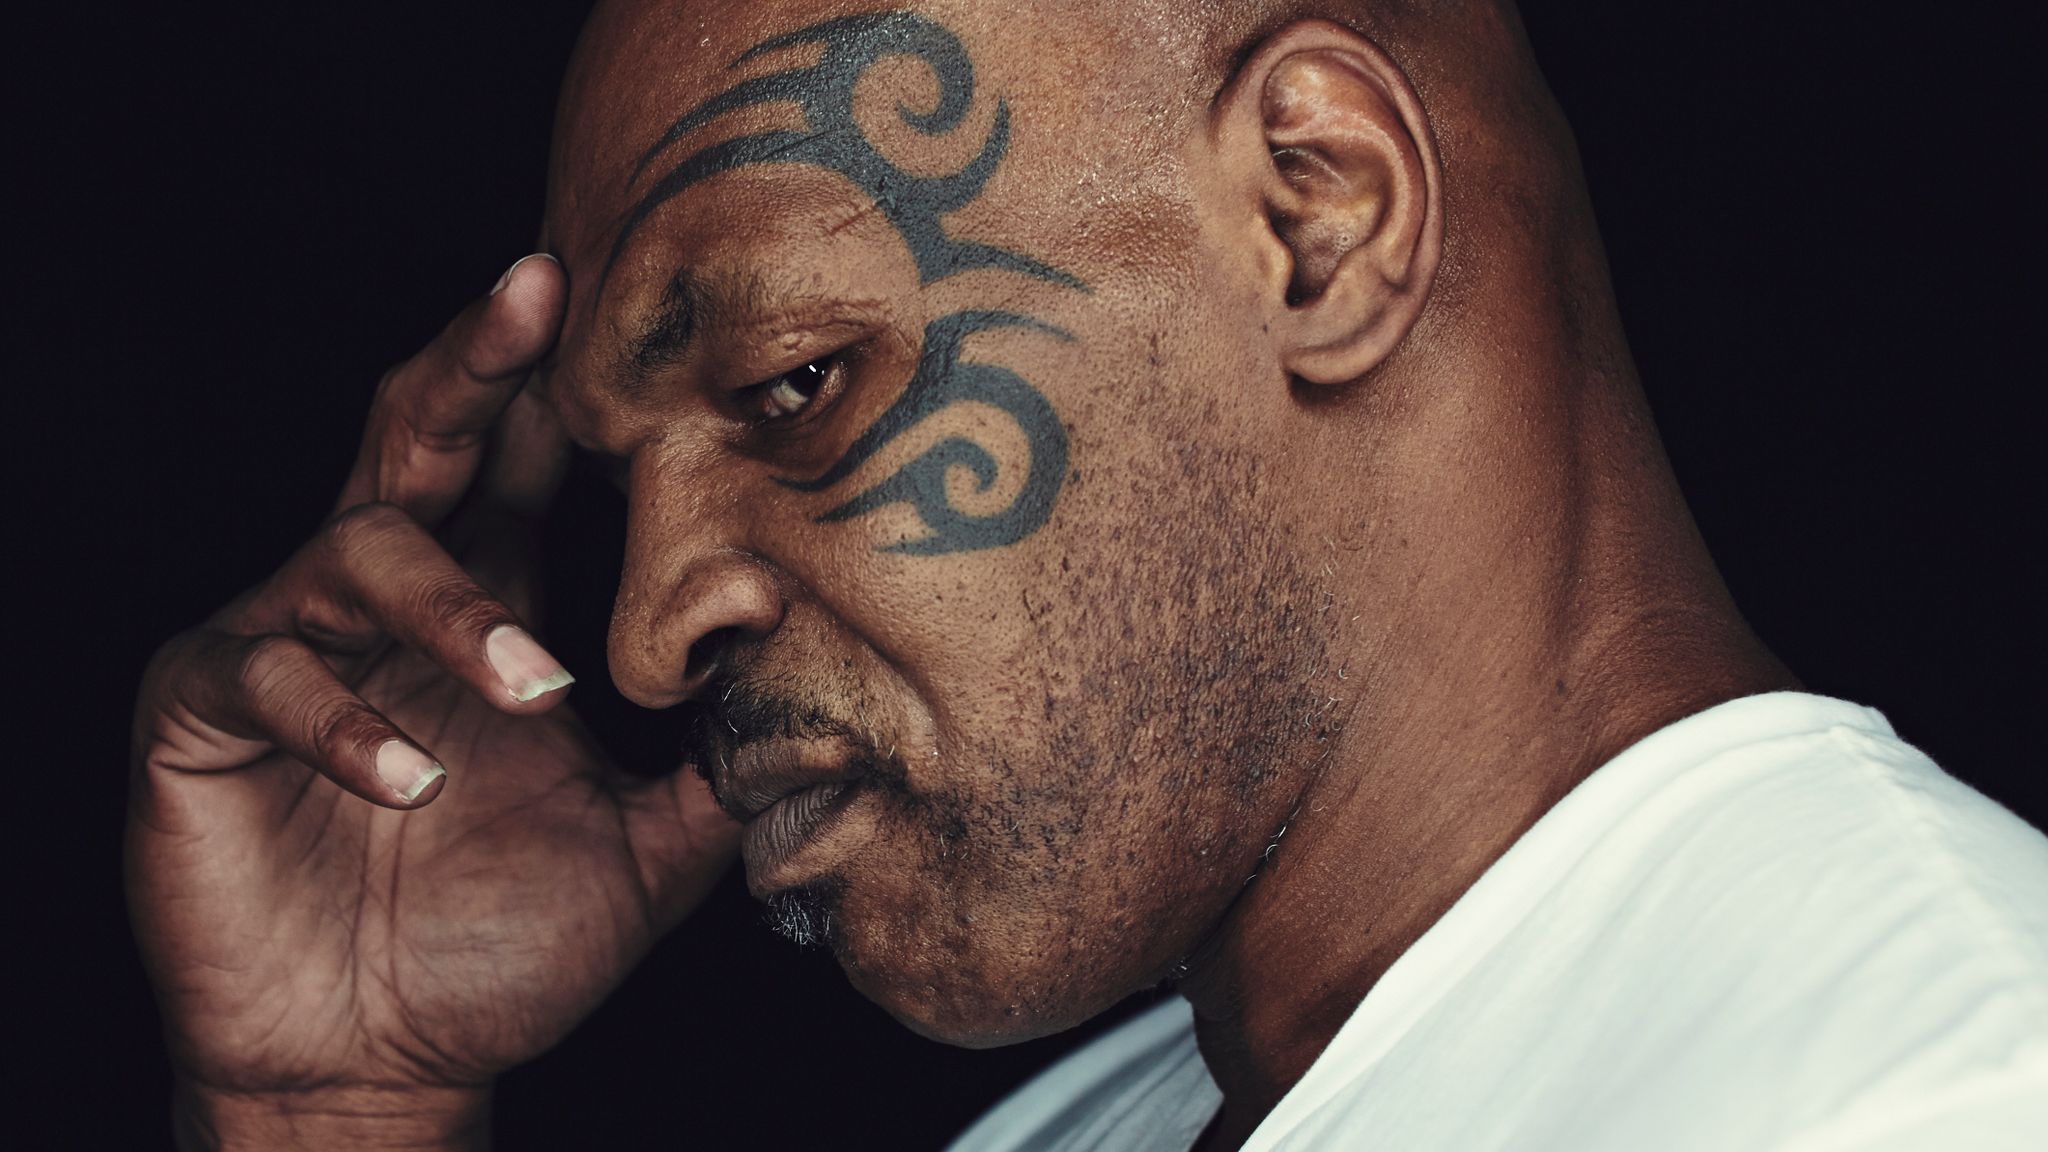 The story behind Mike Tyson's infamous face tattoo with heavyweight legend  originally wanting hearts | talkSPORT